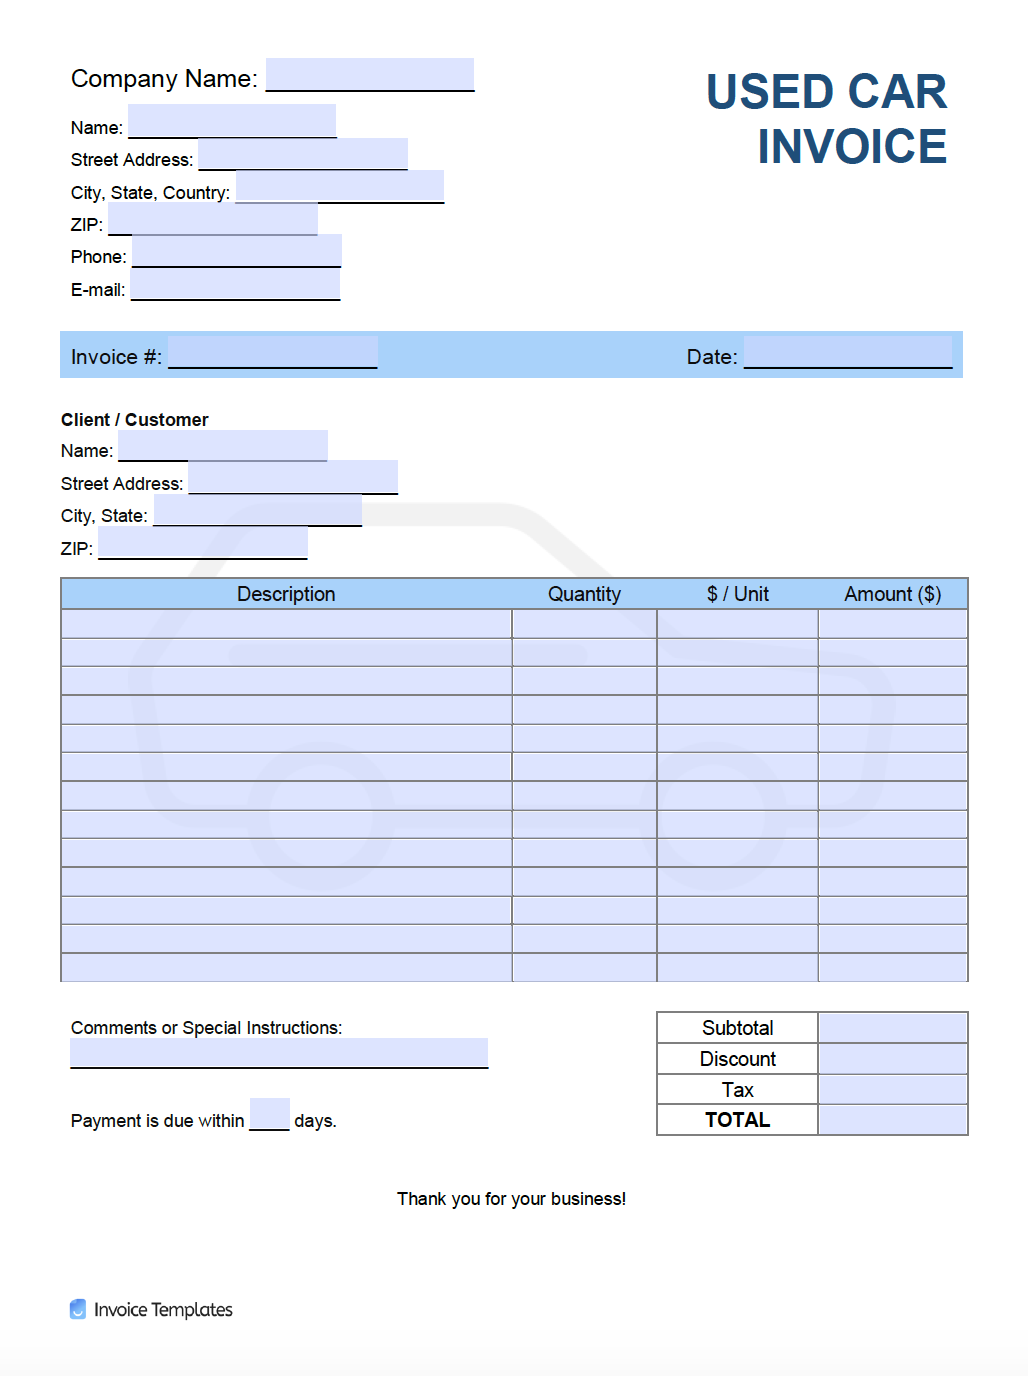 Free Used Car Invoice Template  PDF  WORD  EXCEL Within Car Sales Invoice Template Free Download